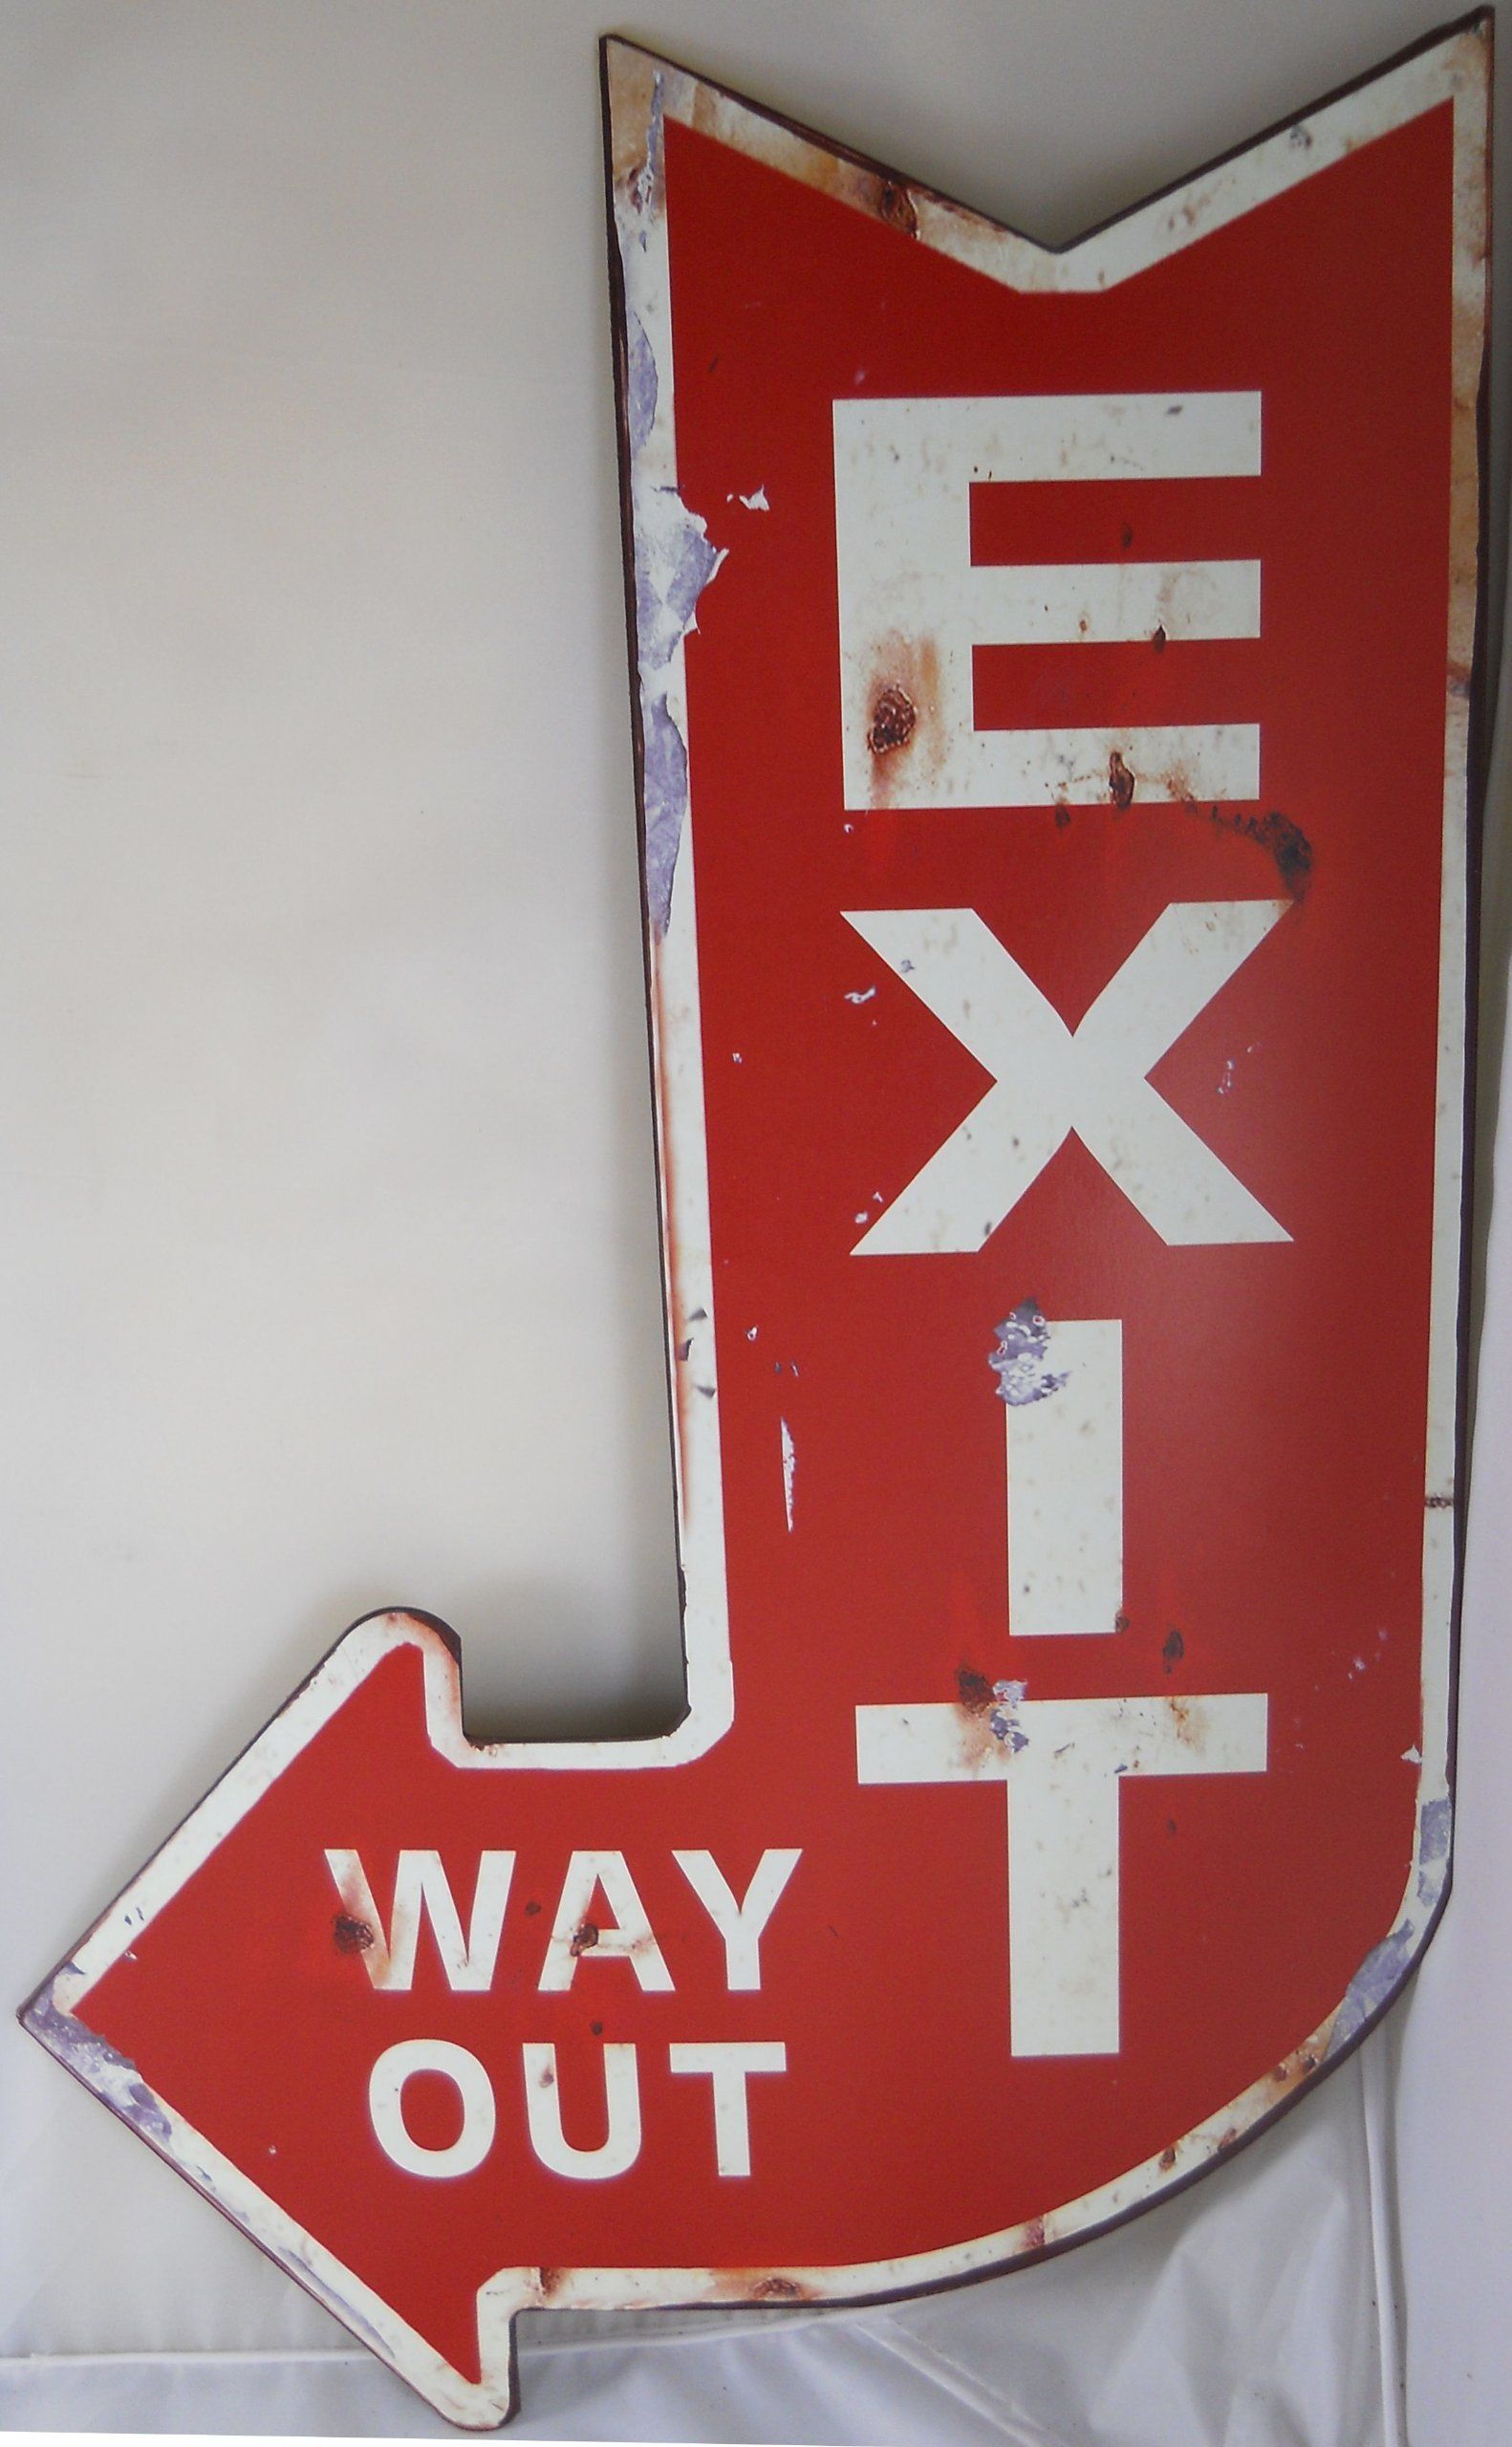 Vintage Looking Exit Way Out Sign $18.50 + $9.05 Shipping With Casual Country Eat Here Retro Wall Decor (Photo 11 of 30)